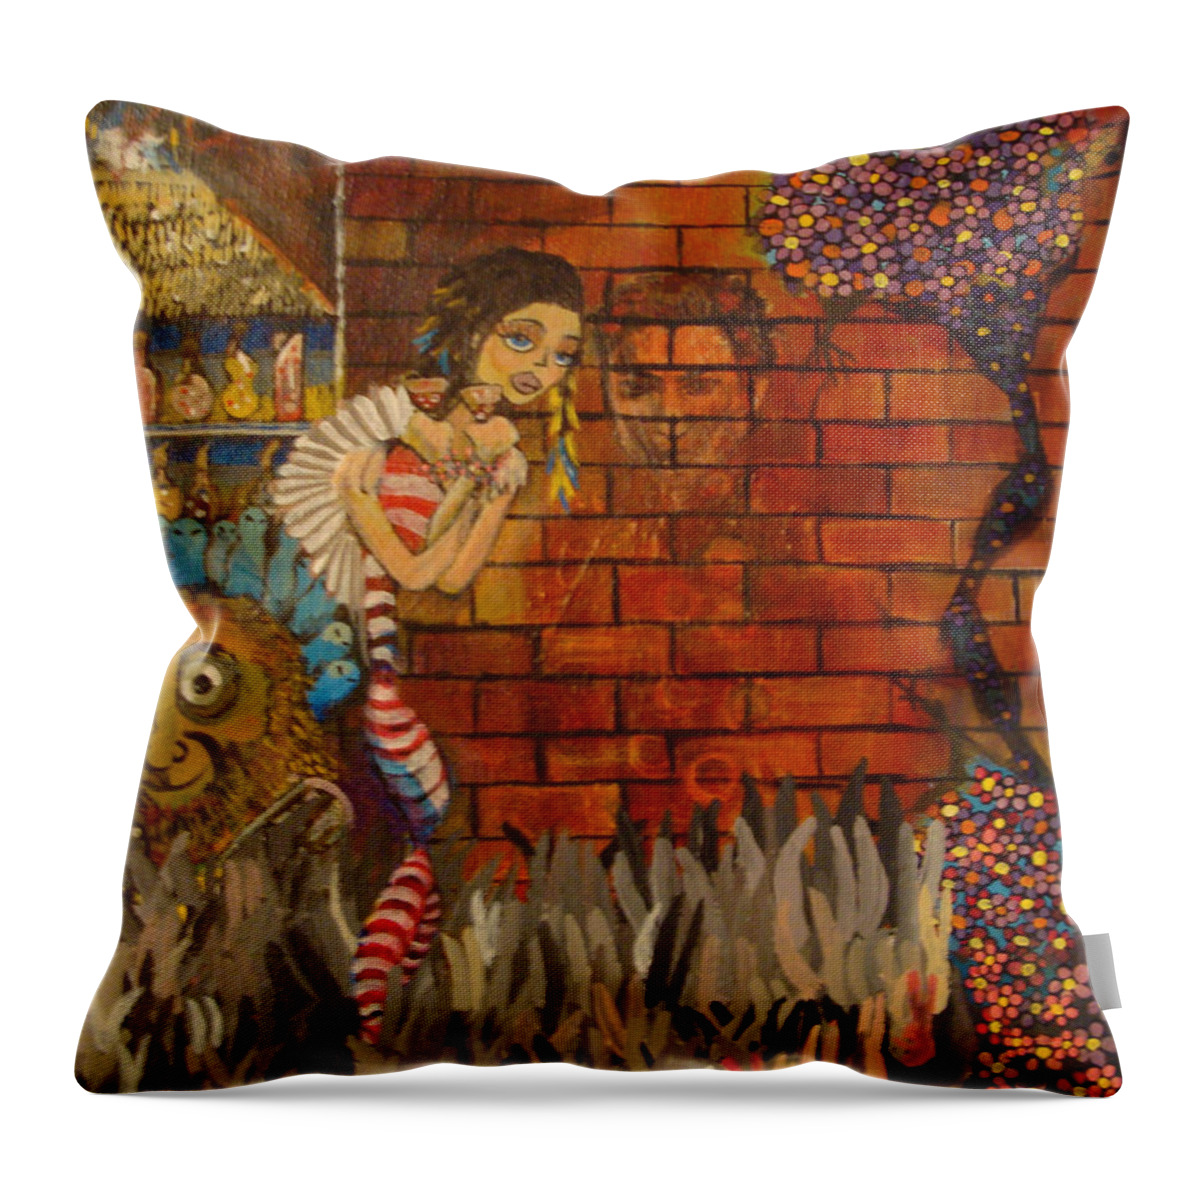 Surreal Throw Pillow featuring the painting Twisted and Empty by Mindy Huntress